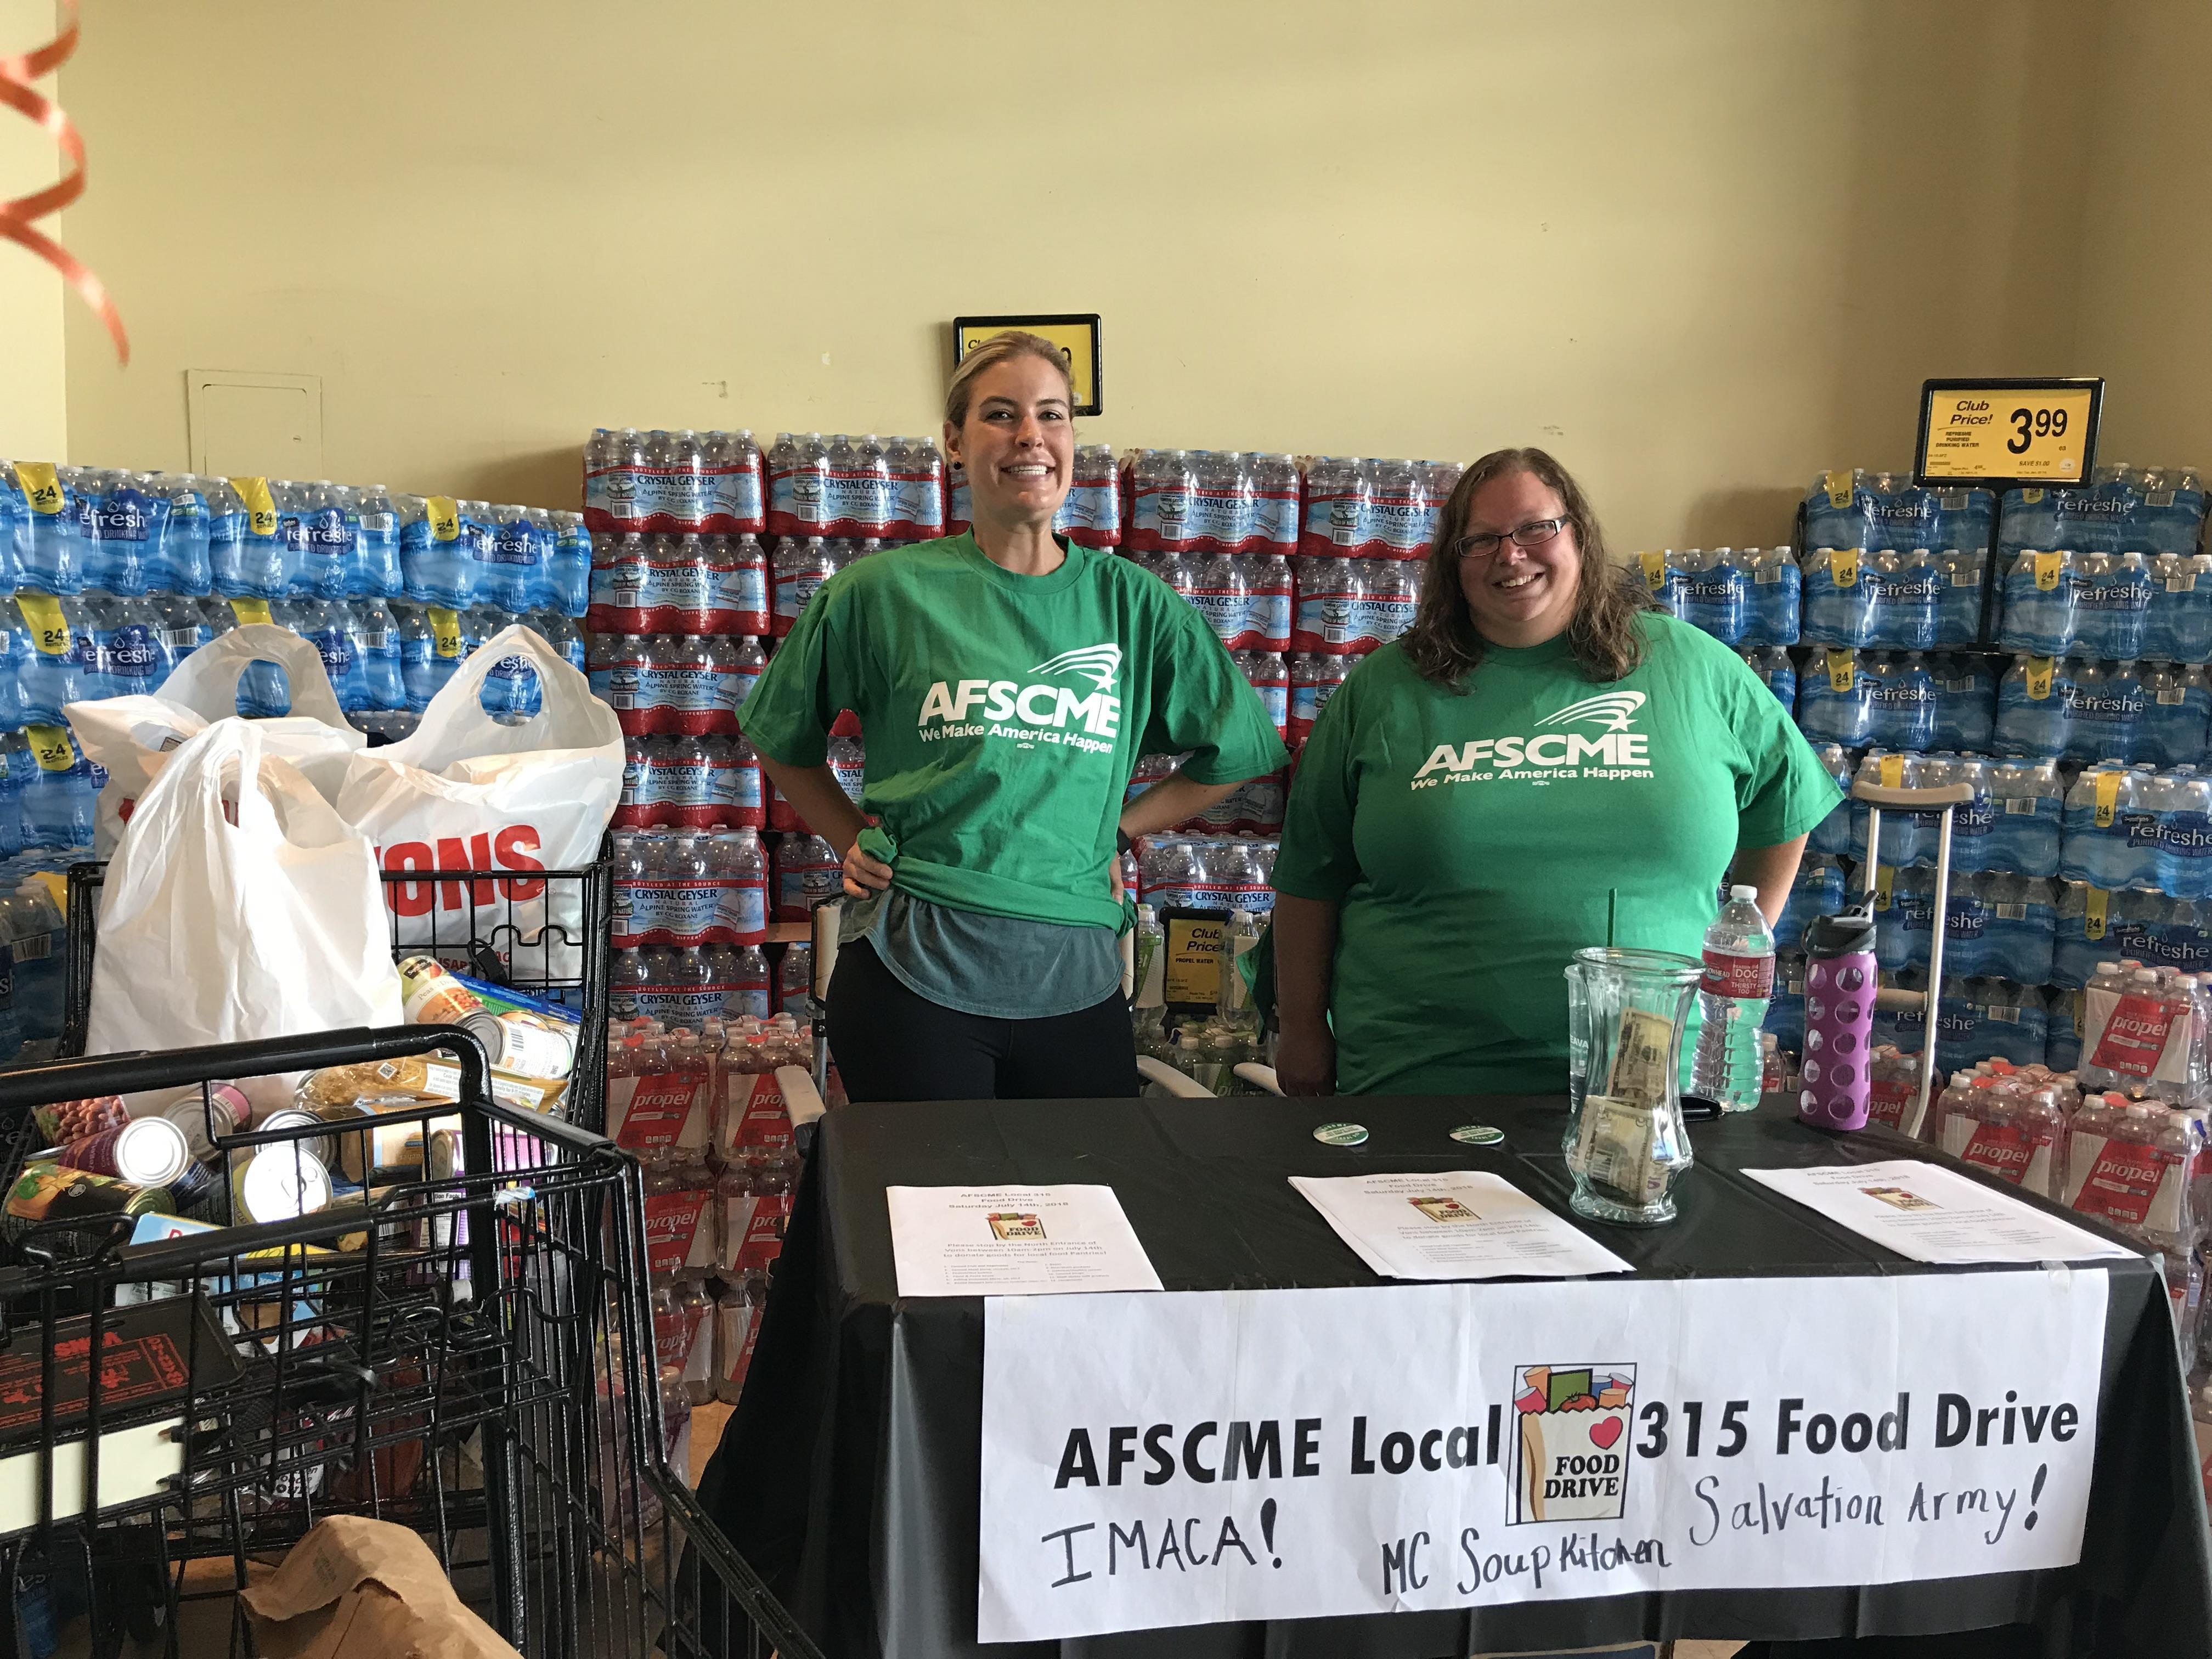 AFSCME Local 315 members Eryn Clark and Laura Bourelle work the booth at the local's food drive in Bishop.